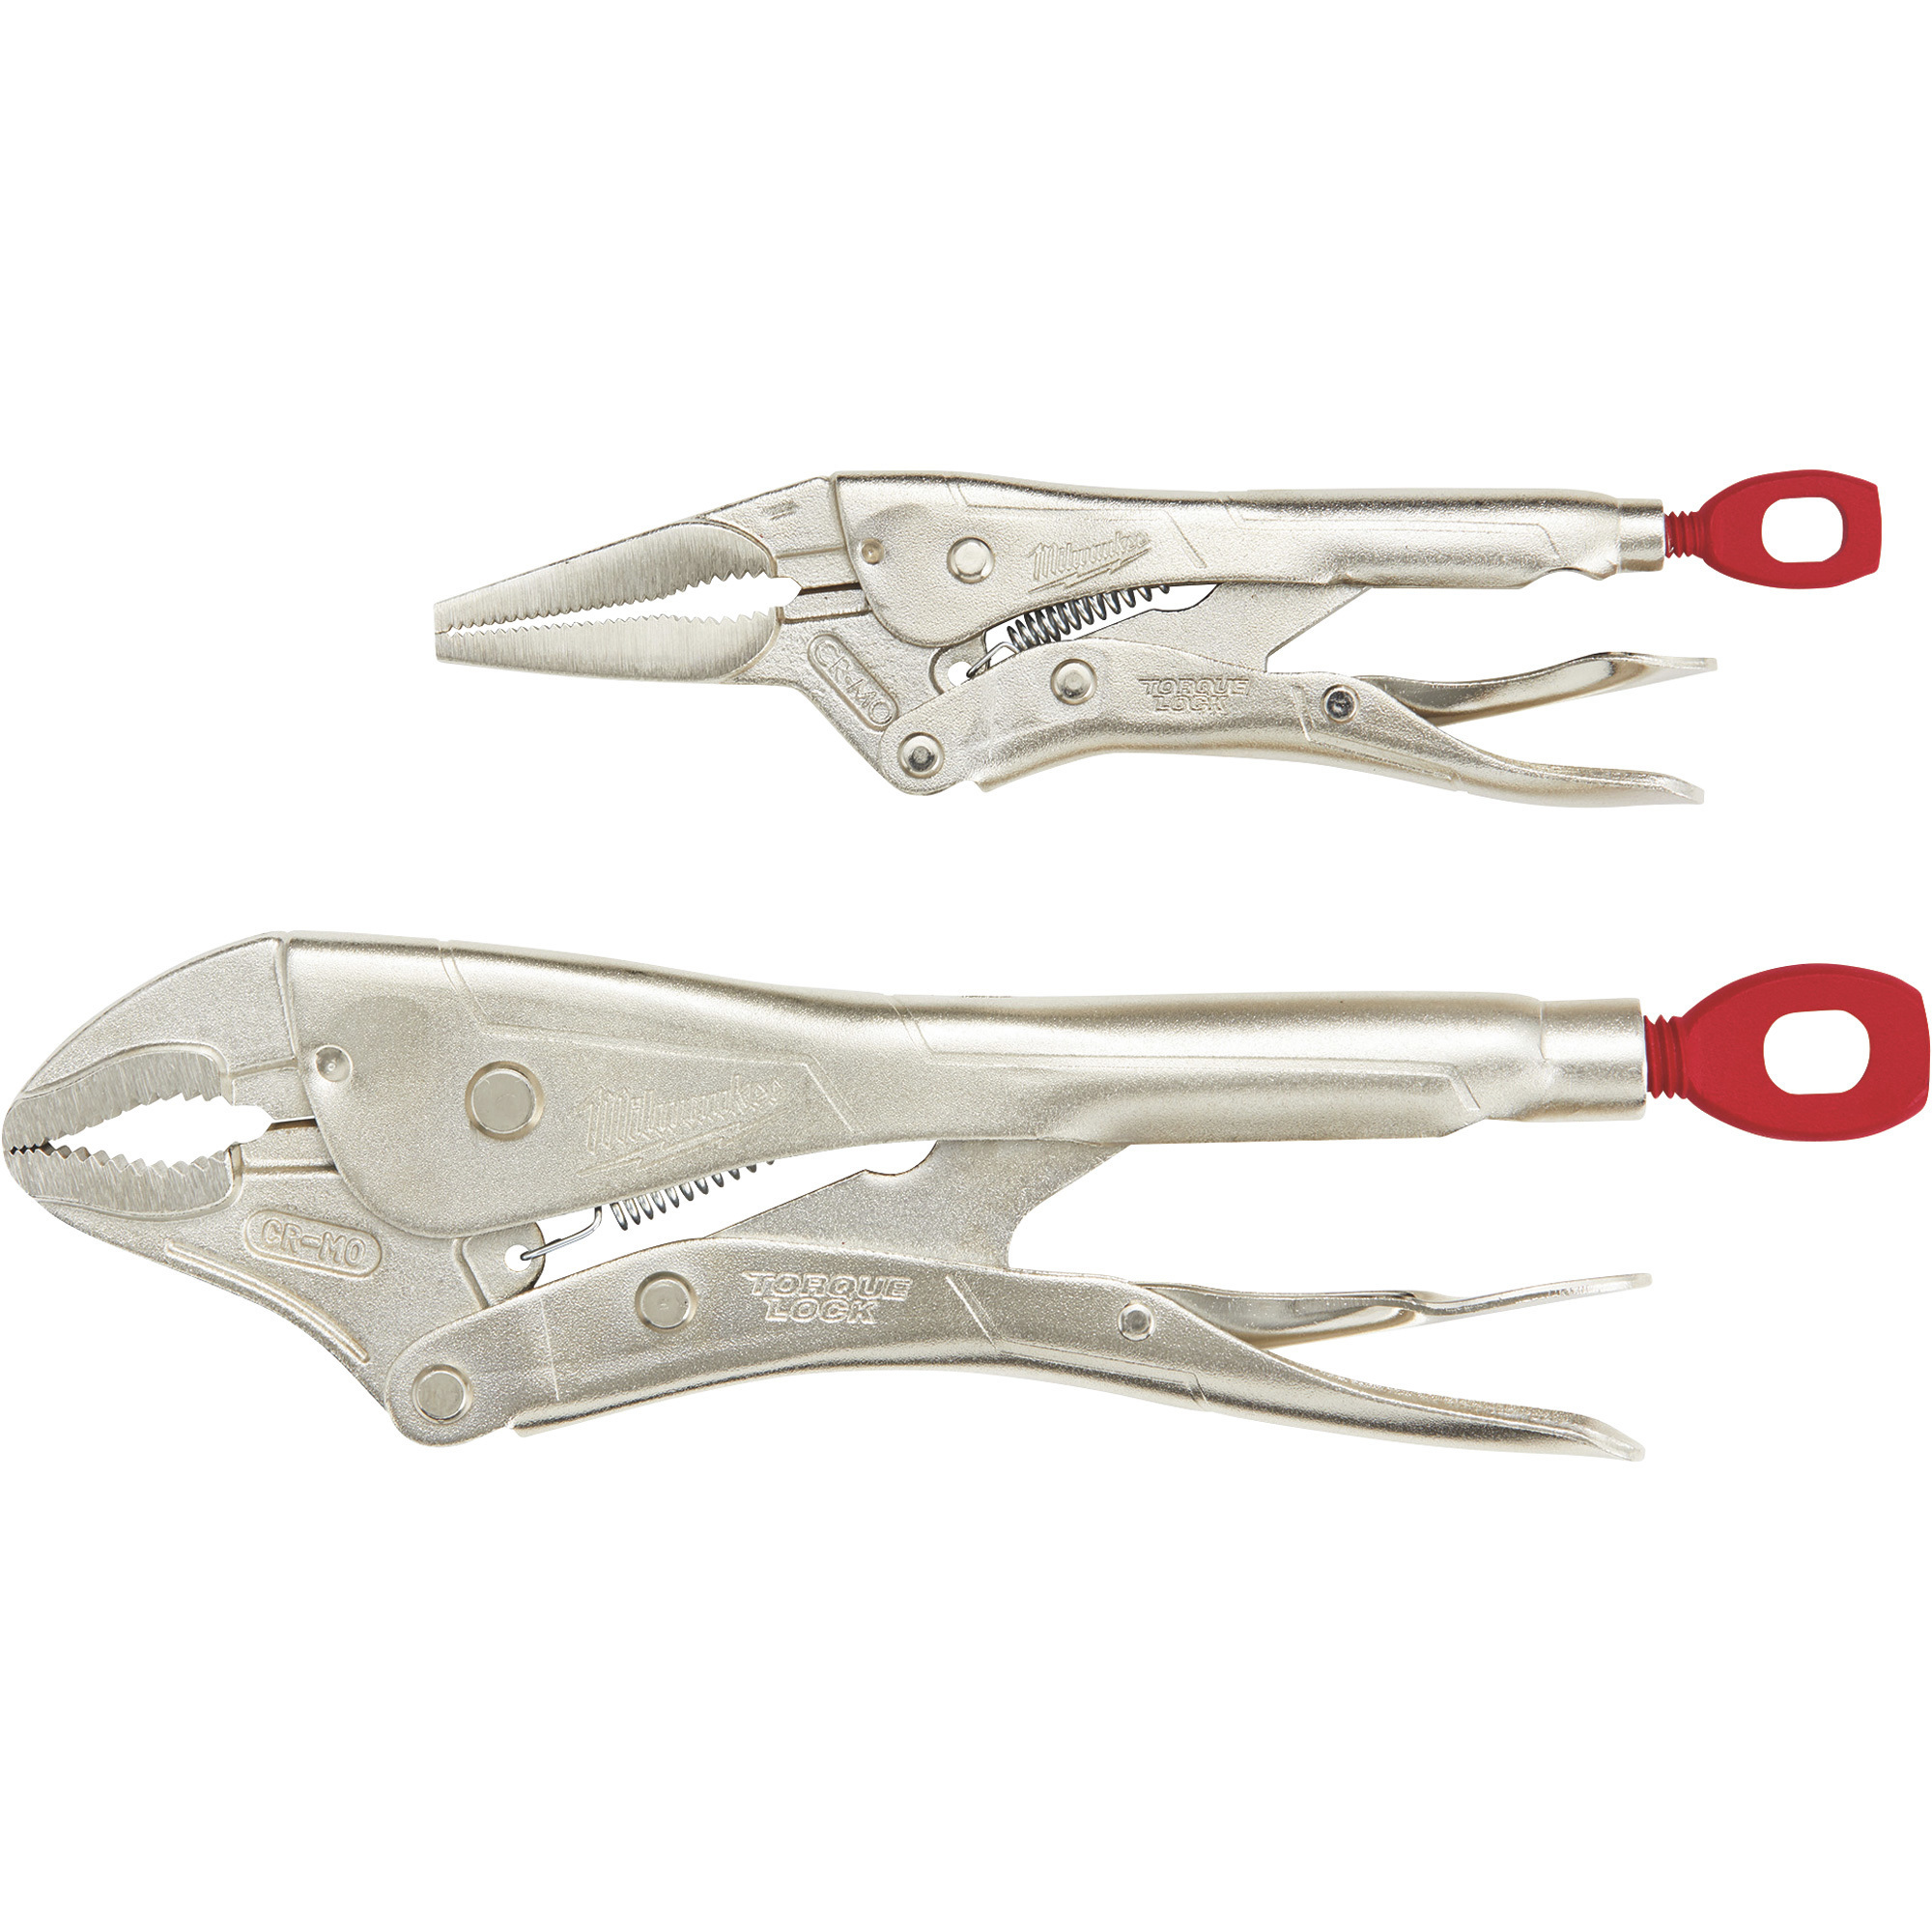 Milwaukee Torque Lock Locking Pliers Set, 2-Piece, 10Inch Curved Jaw, 6Inch Long Nose, Model 48-22-3602